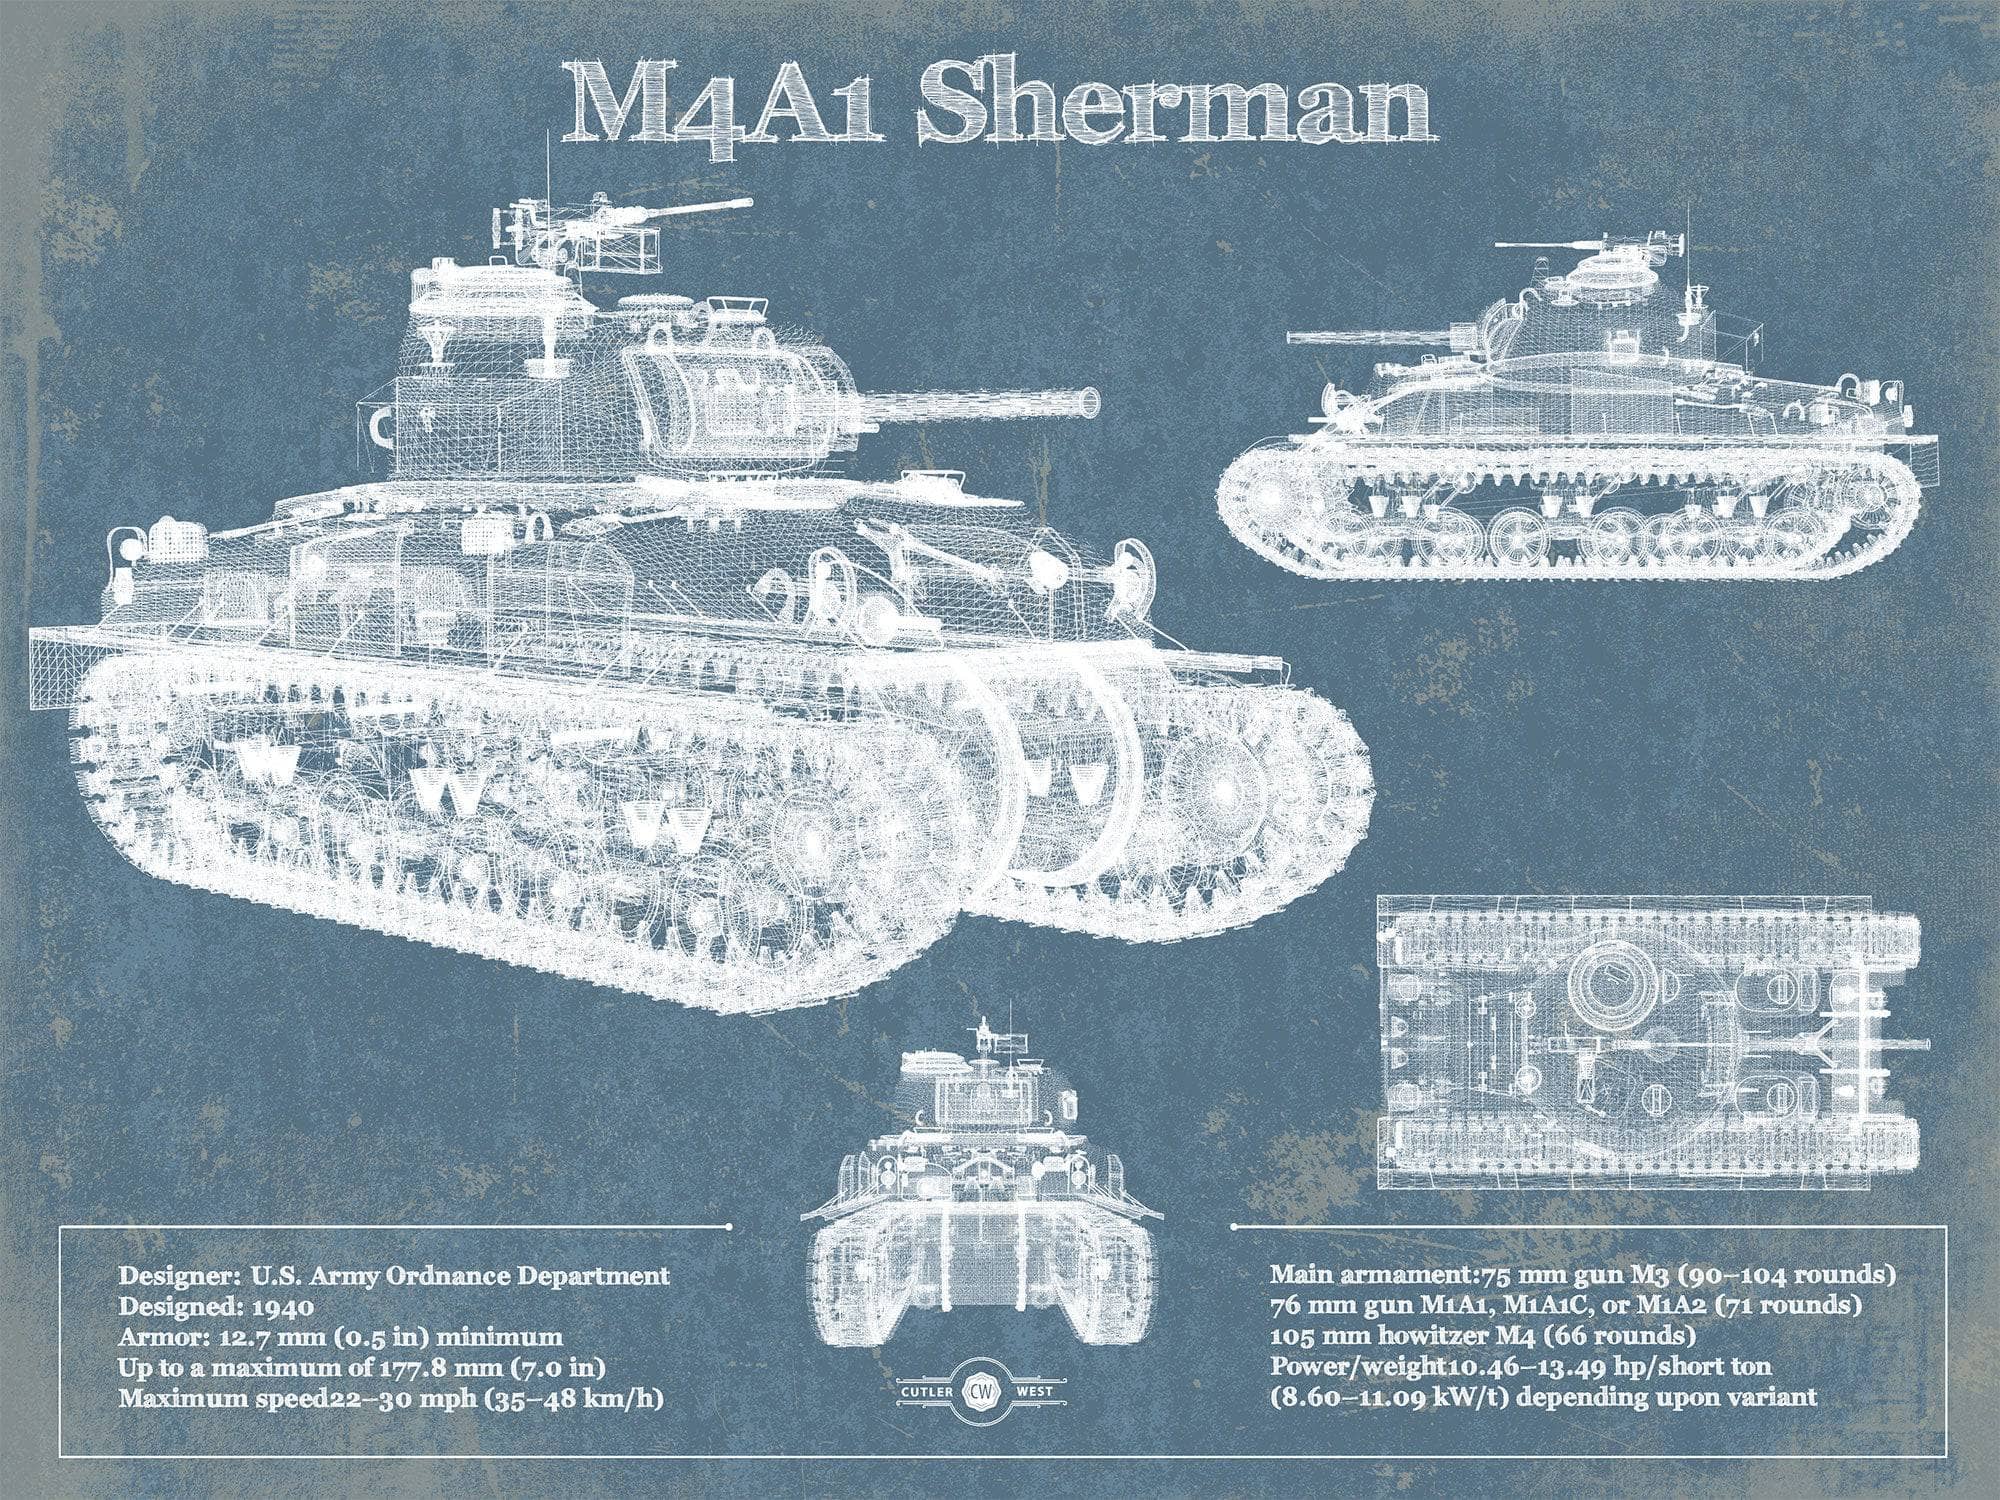 Cutler West Military Weapons Collection 14" x 11" / Unframed M4A1 Sherman Tank Vintage Blueprint Print 845000241_15764